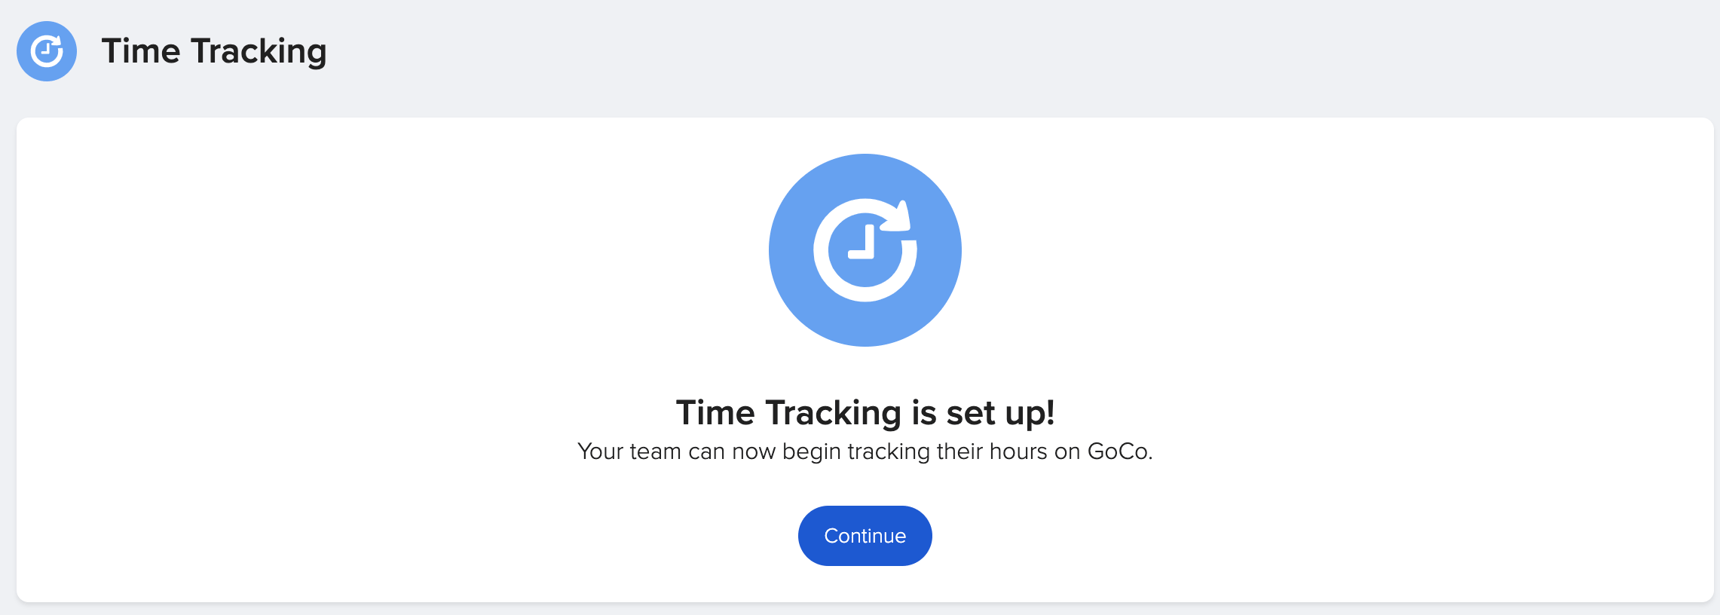 How do I set up a Time Tracking policy?